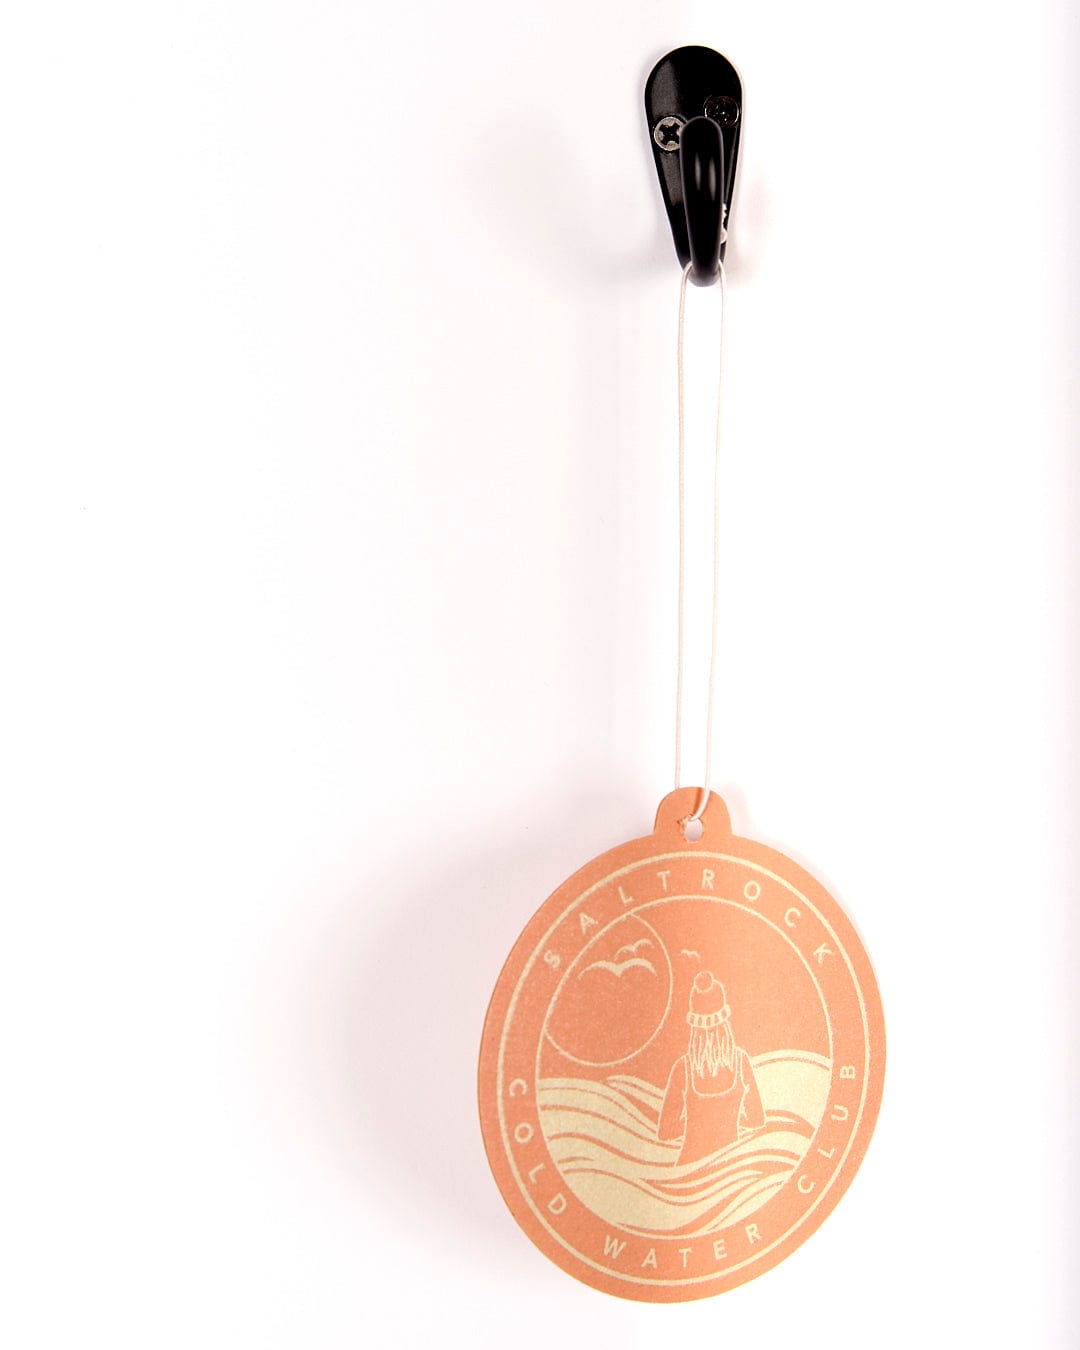 An orange and black luggage tag with a Cold Water Club - Air Freshener scented design on it by Saltrock.